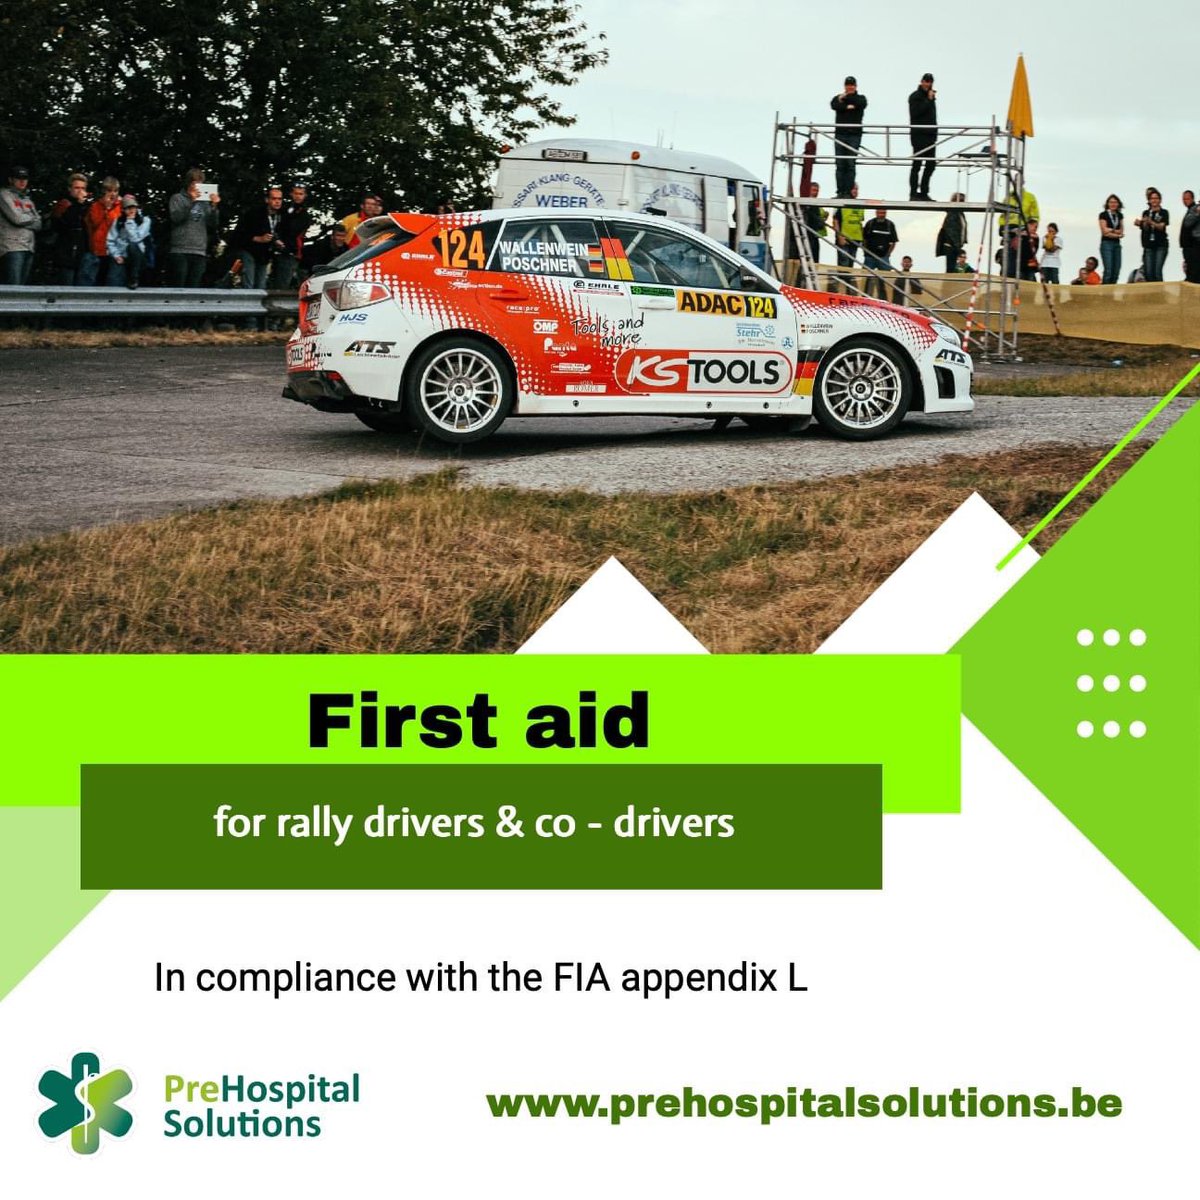 You need a first aid training for your FIA International #rally  #driverslicence (ITD-R)?

We prepare you to be efficient & adequate in case of an #crash. 

For more information:
prehospitalsolutions.be/opleidingen/eh…

#racing #firstaid #firstaidcourse #FIA #cpr #rallycar #racecar